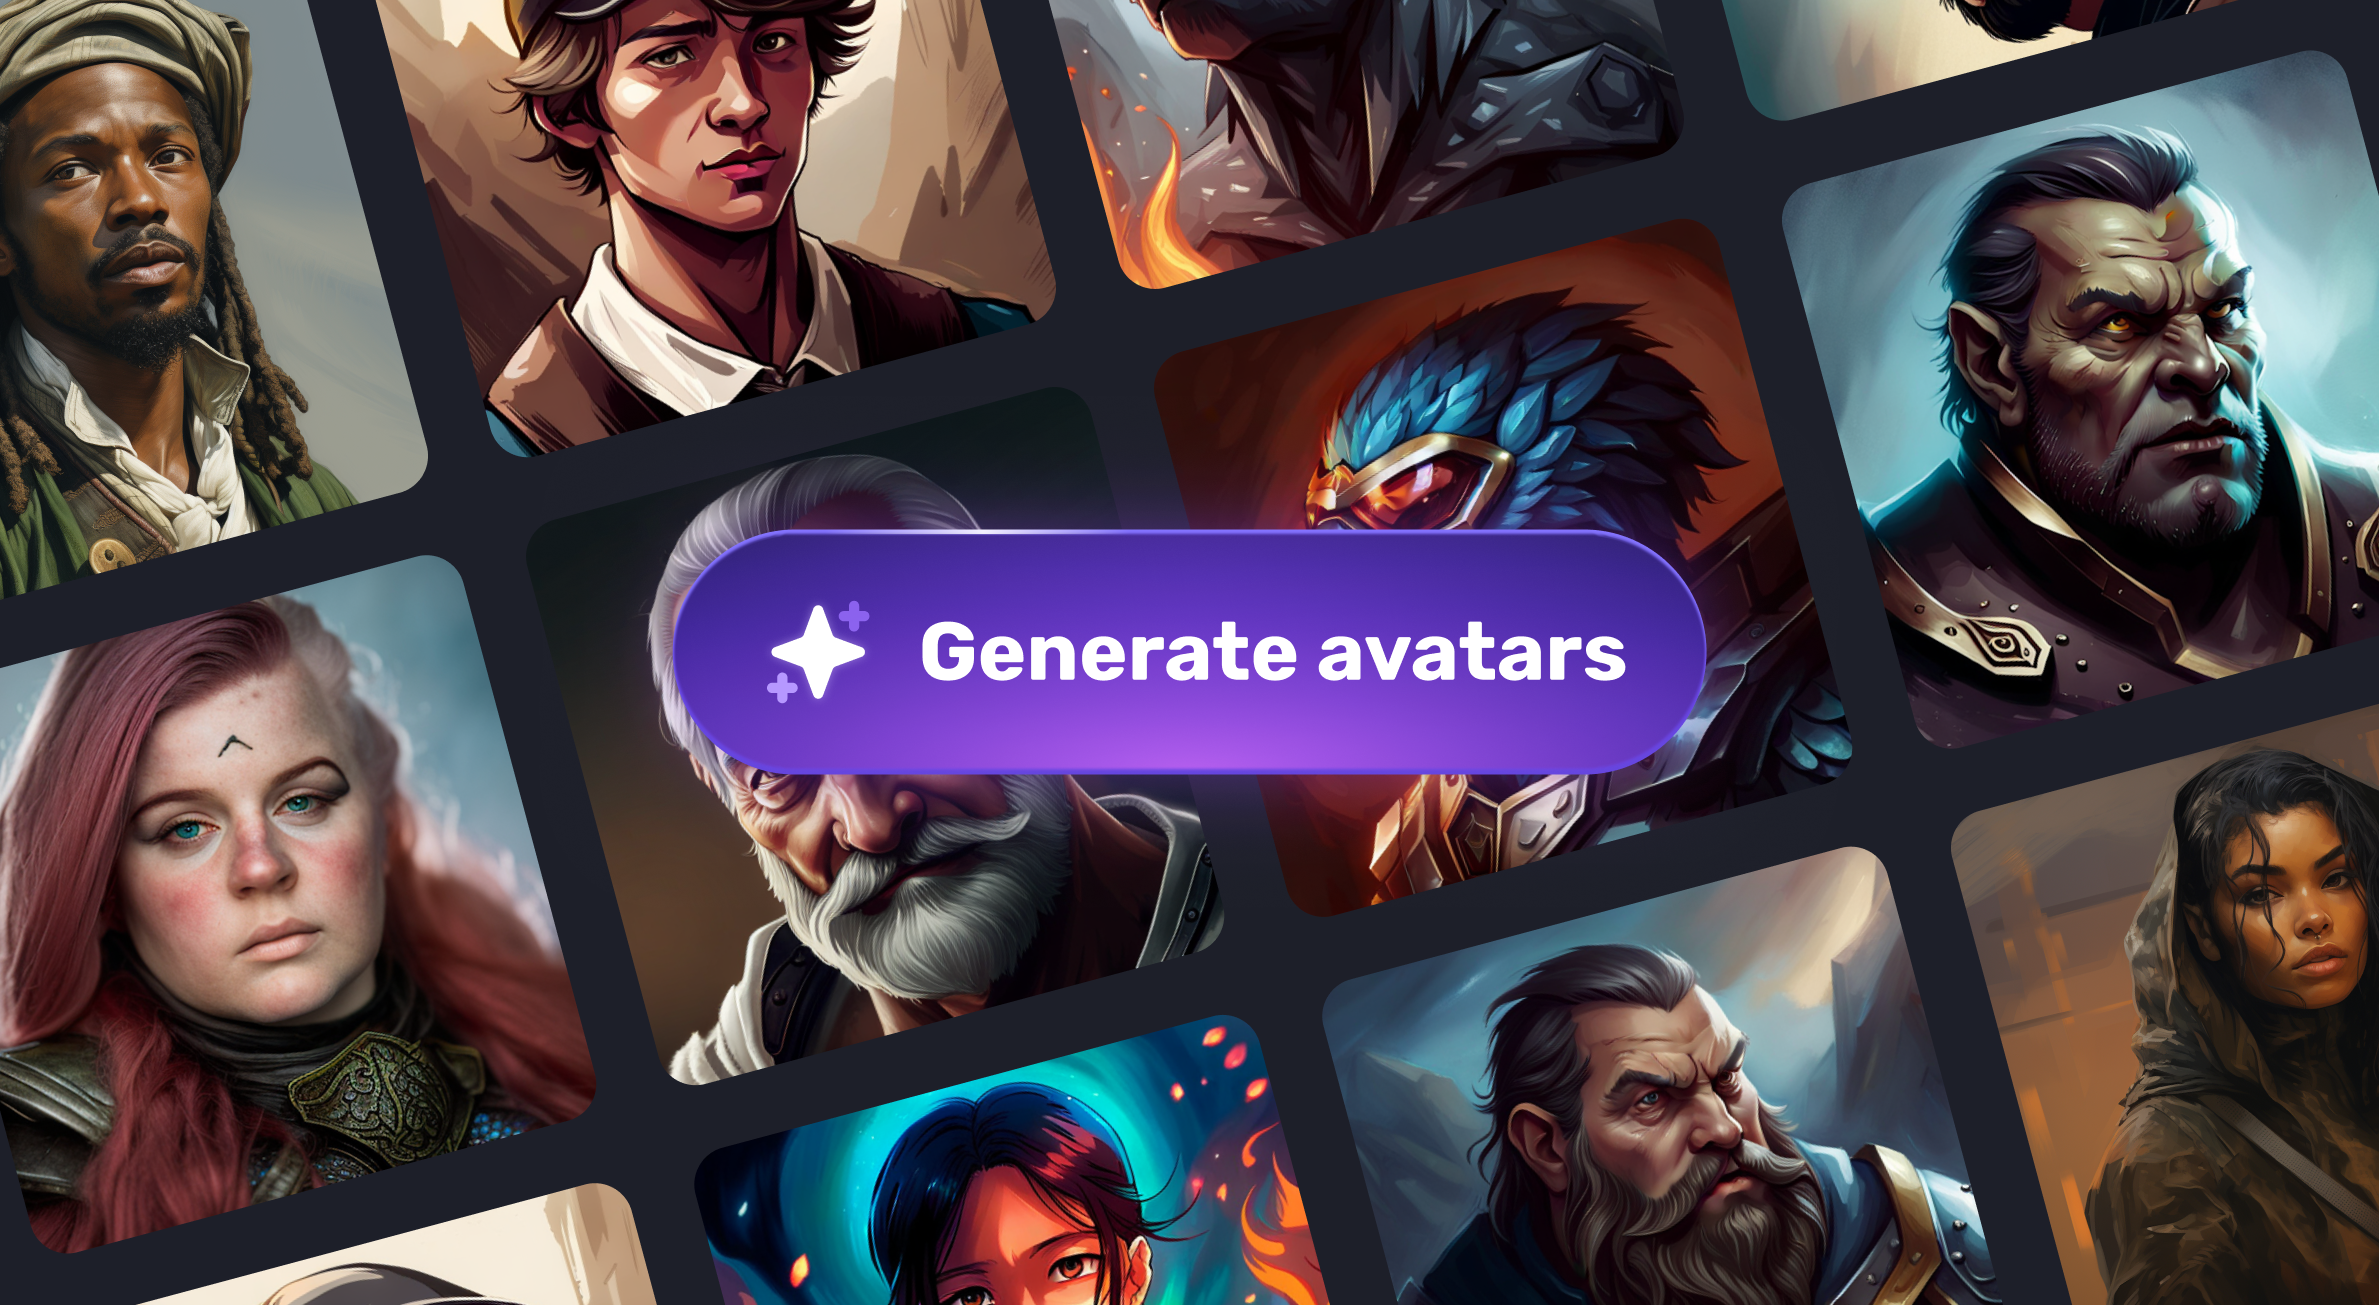 Create your own character avatars in Quest Portal.